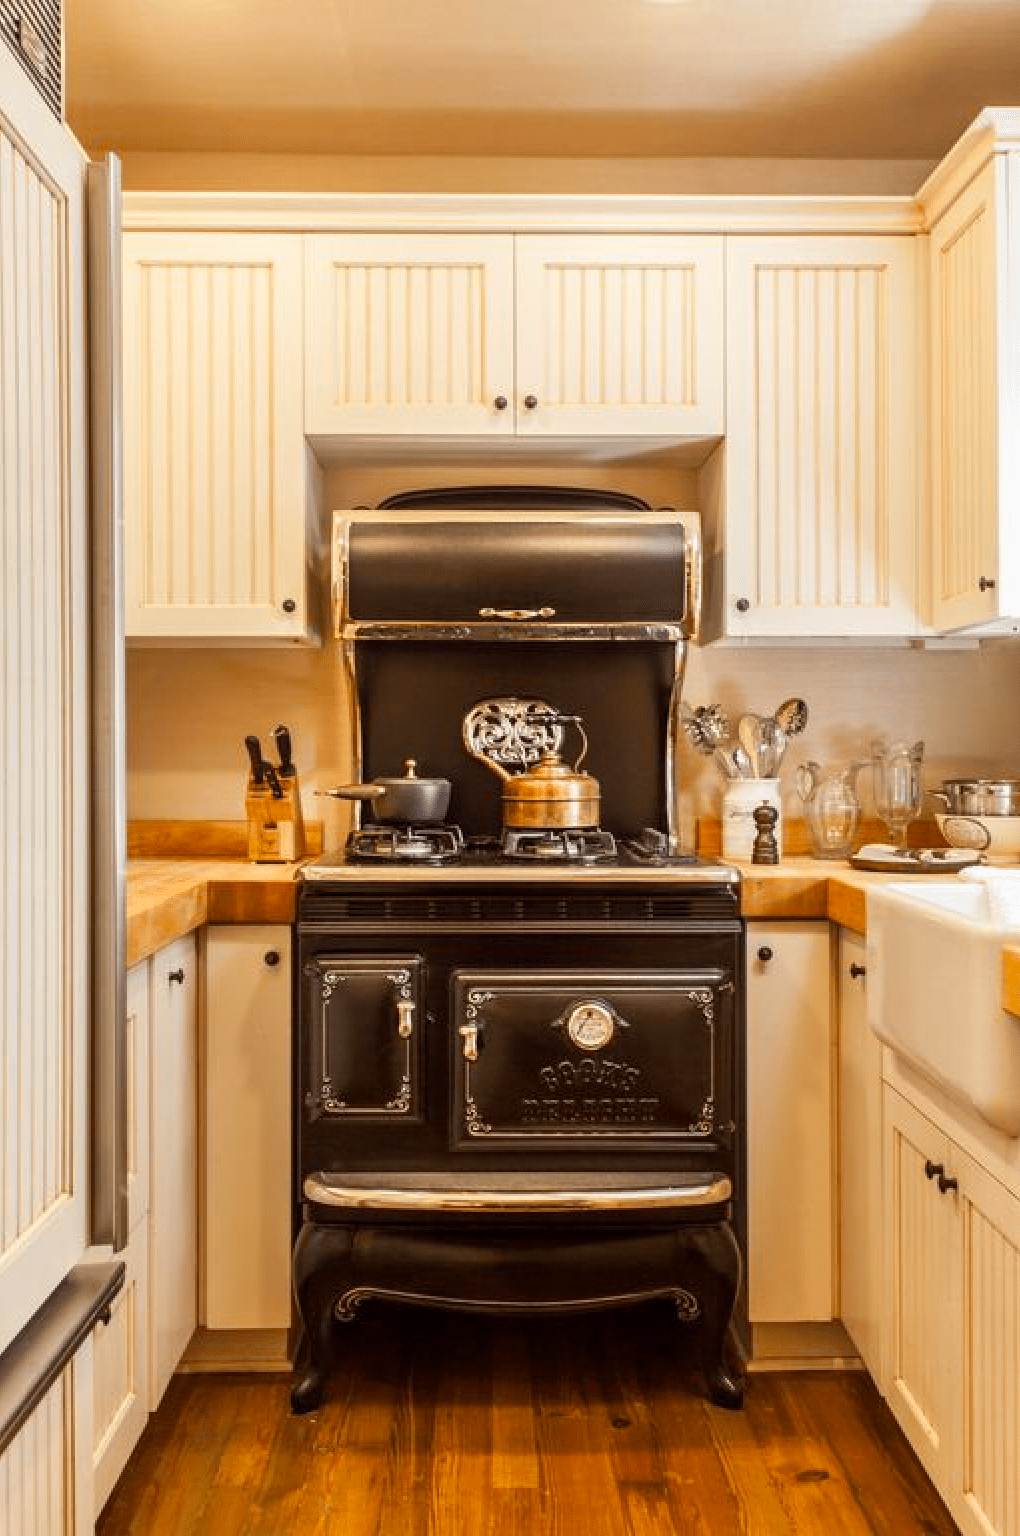 Antique stove in historic home